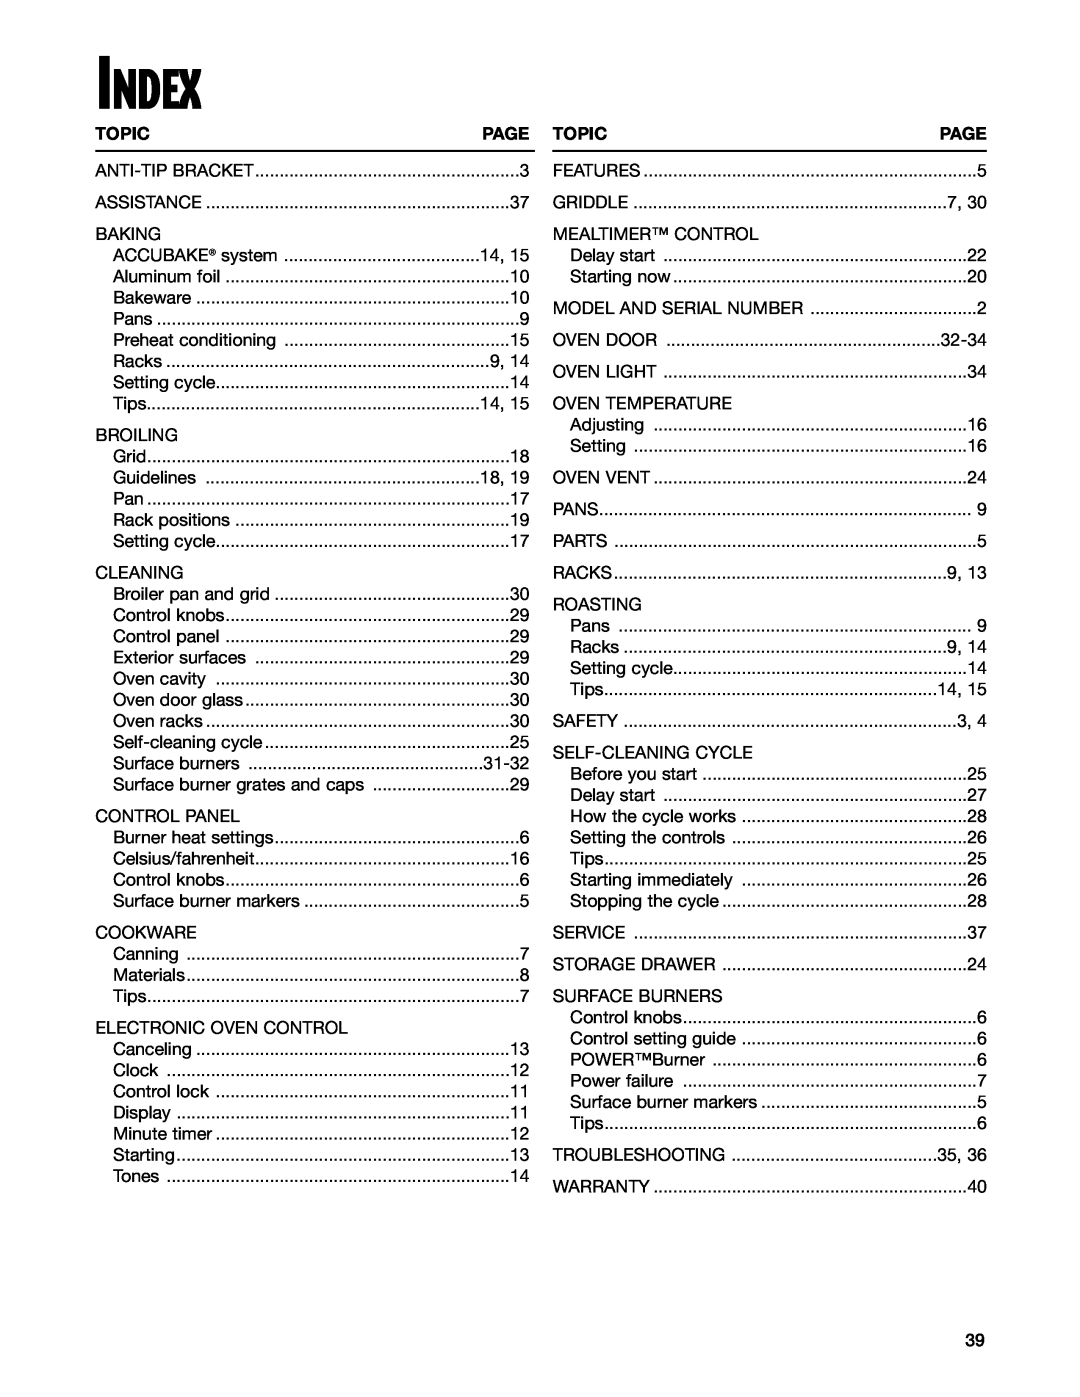 Whirlpool SF195LEH warranty Index, Topic, Page 